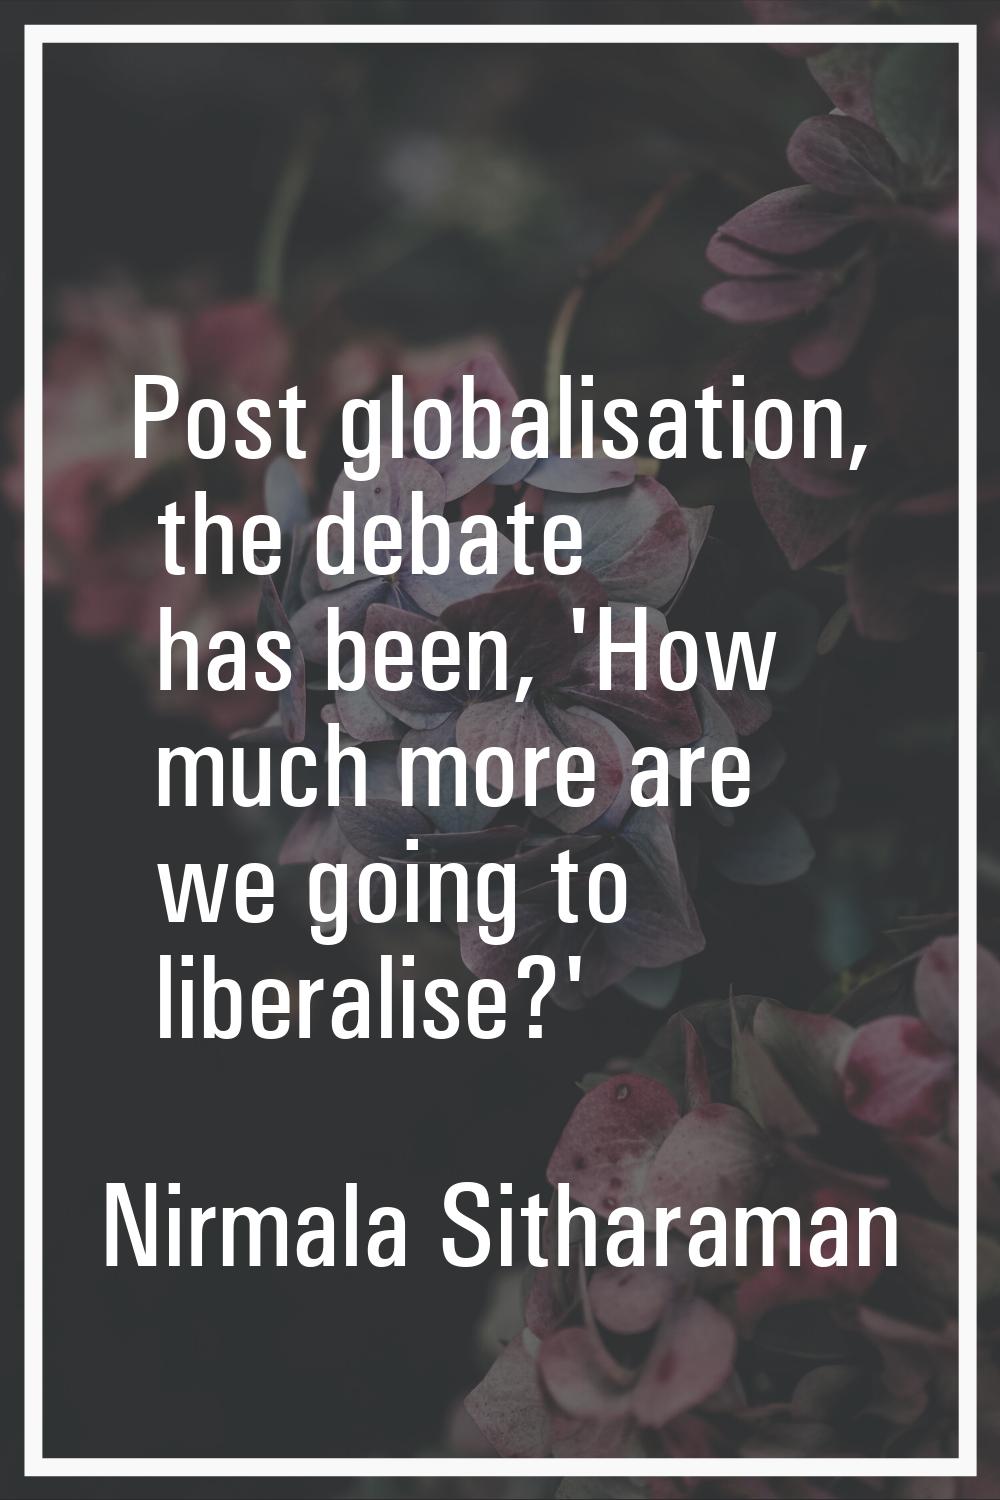 Post globalisation, the debate has been, 'How much more are we going to liberalise?'